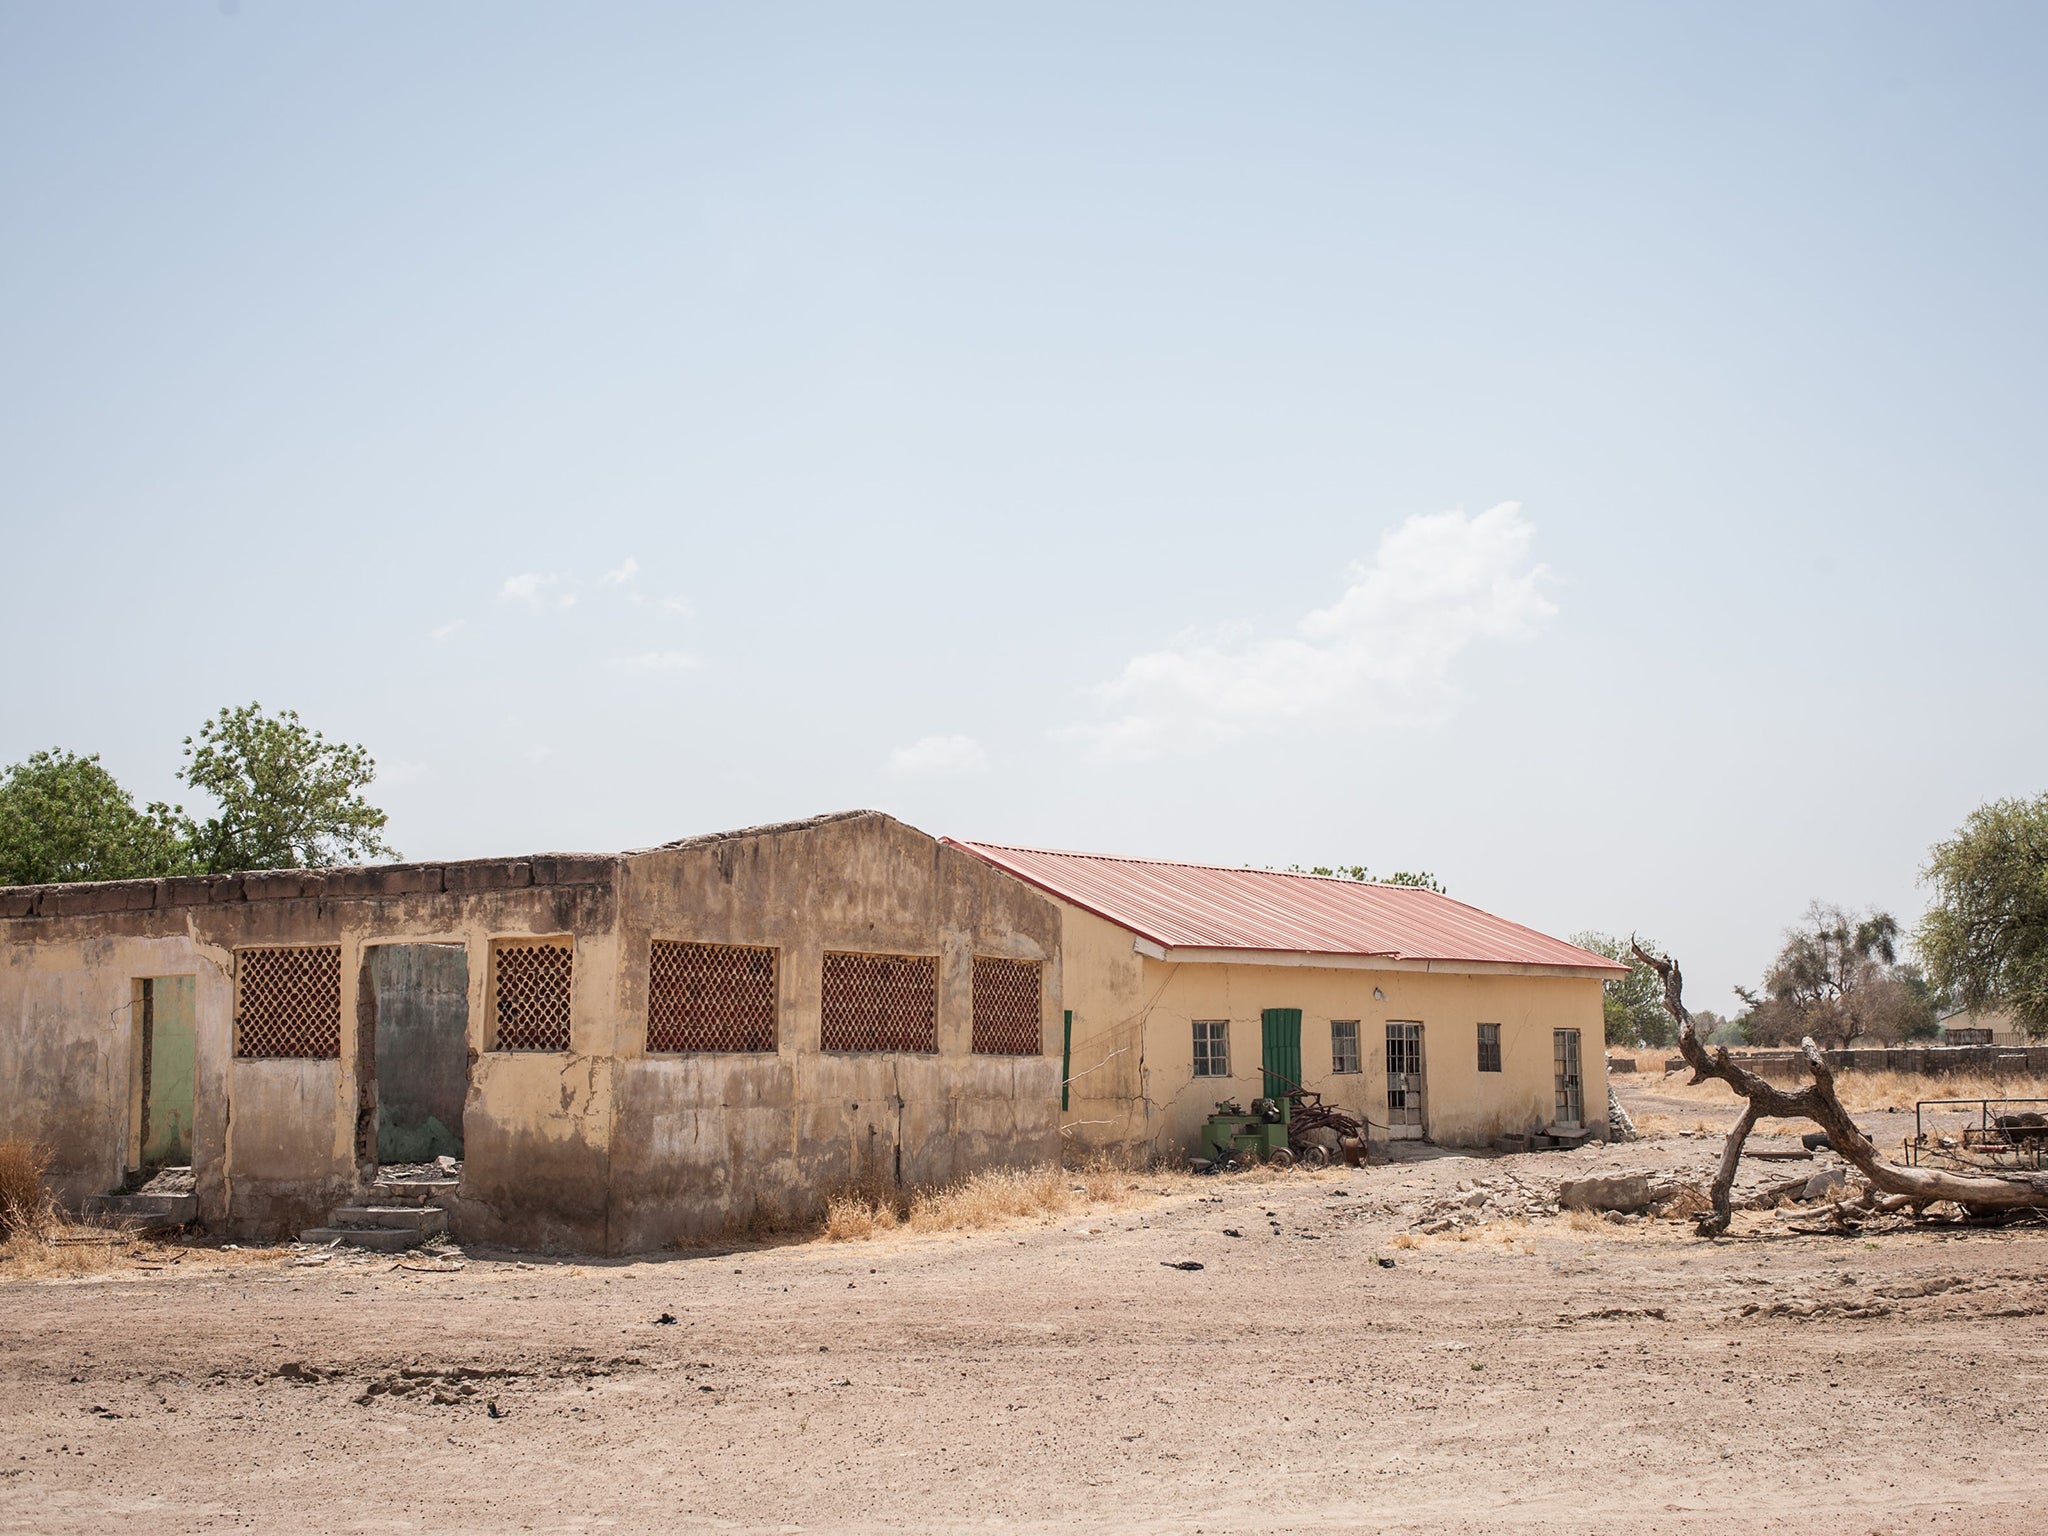 The Government Girls Secondary School in Chibok, northeast Nigeria, where Boko Haram kidnapped 276 teenagers in the dead of night nearly two years ago